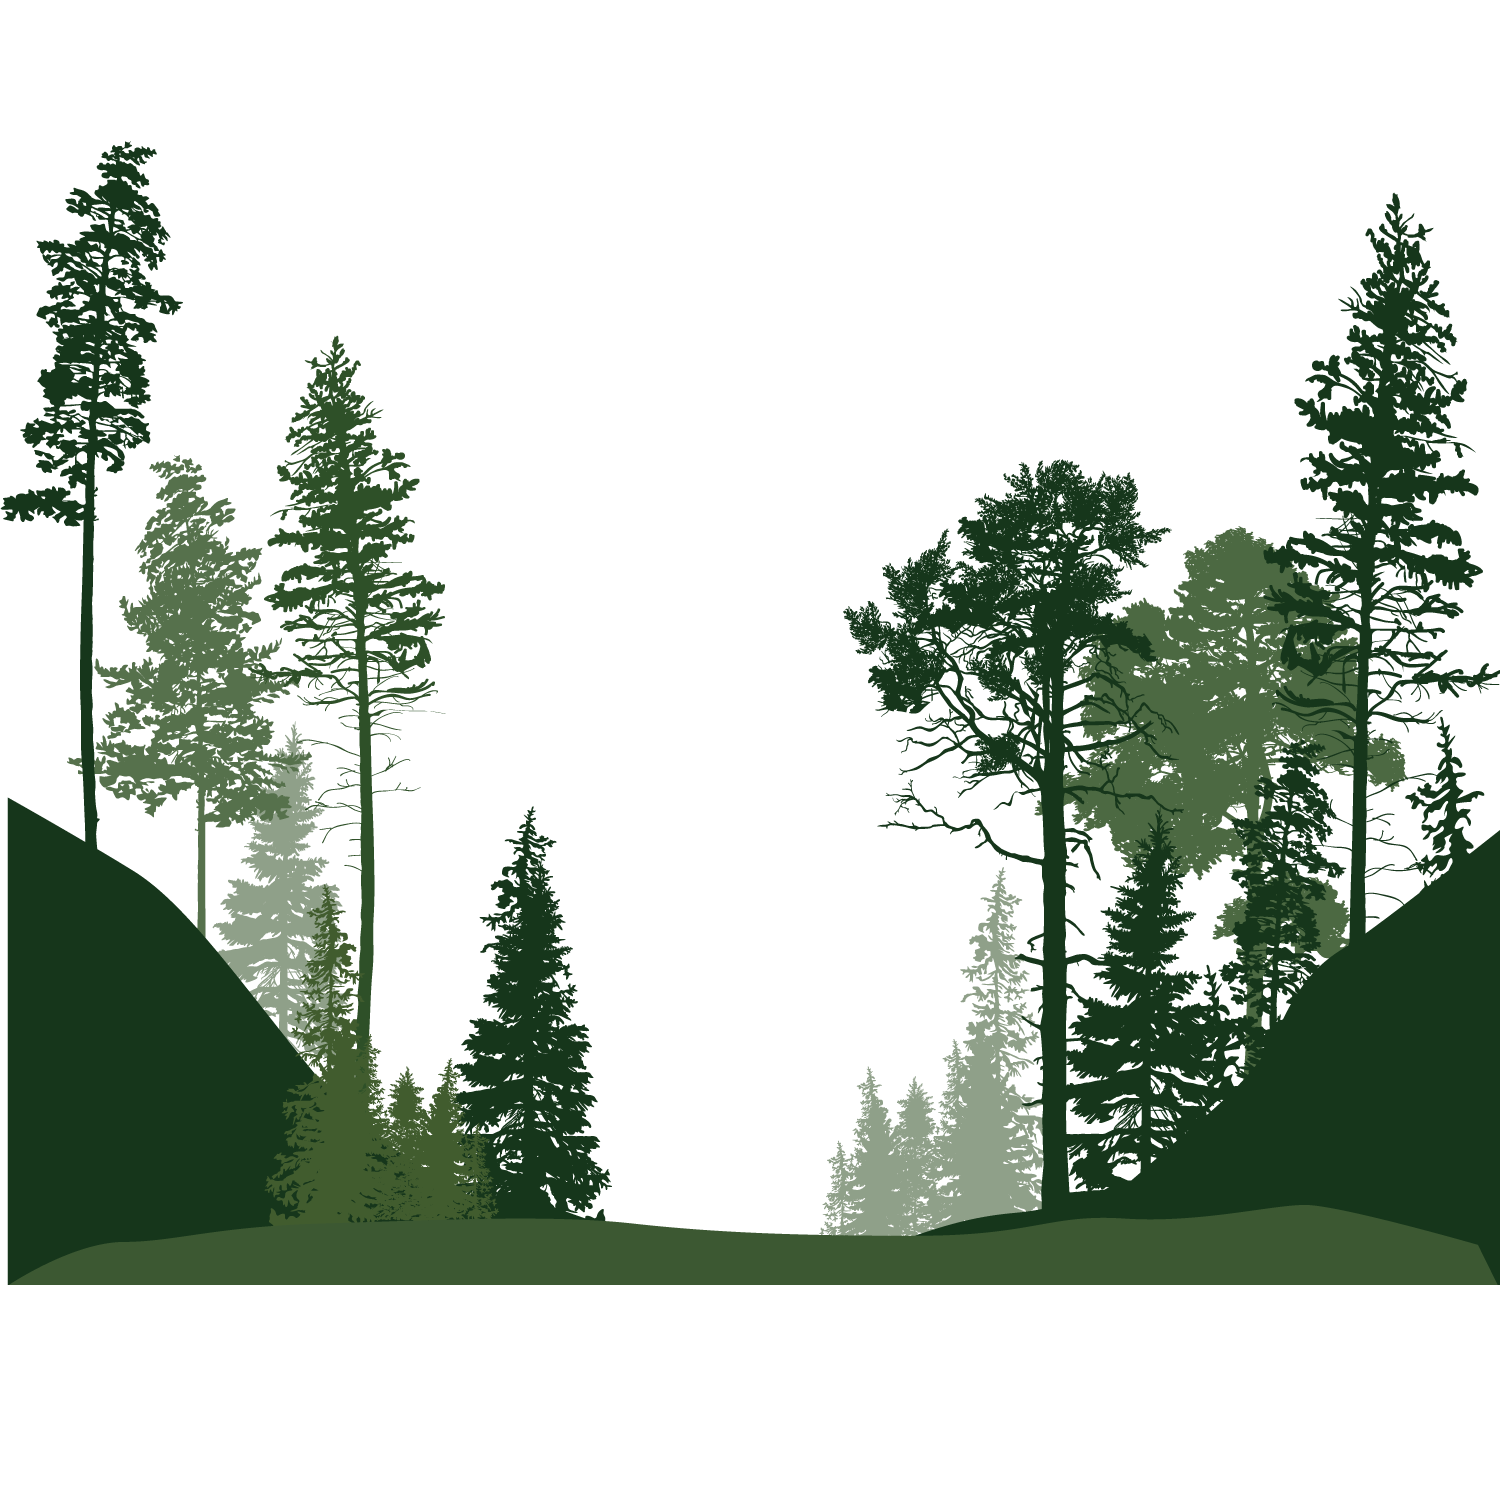 Forest PNG Image File